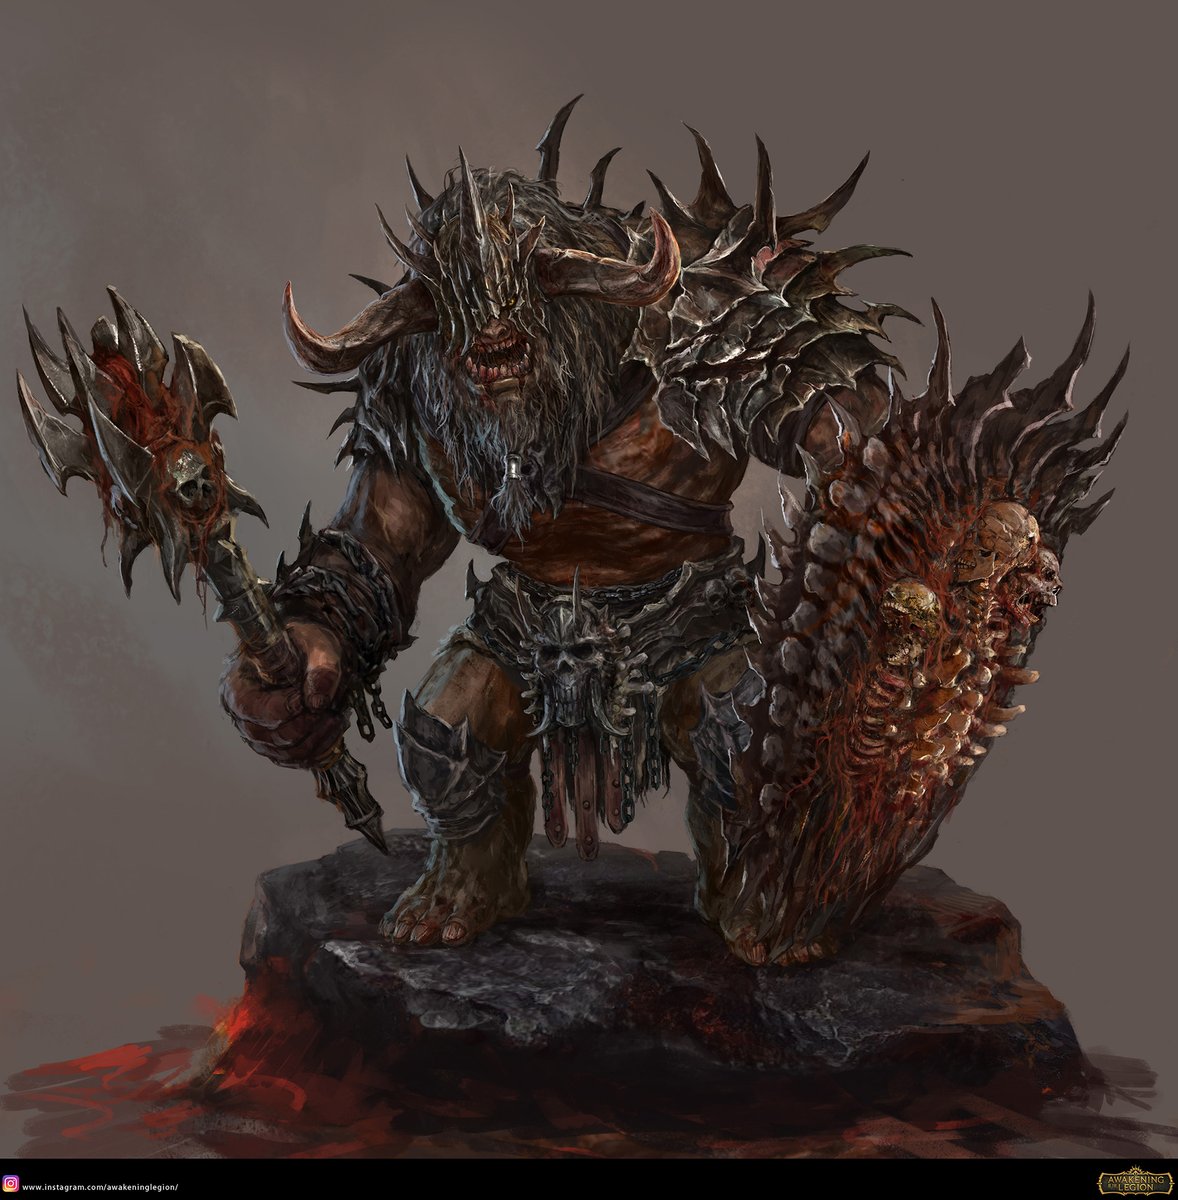 Orc warrior from the awakening of the legion